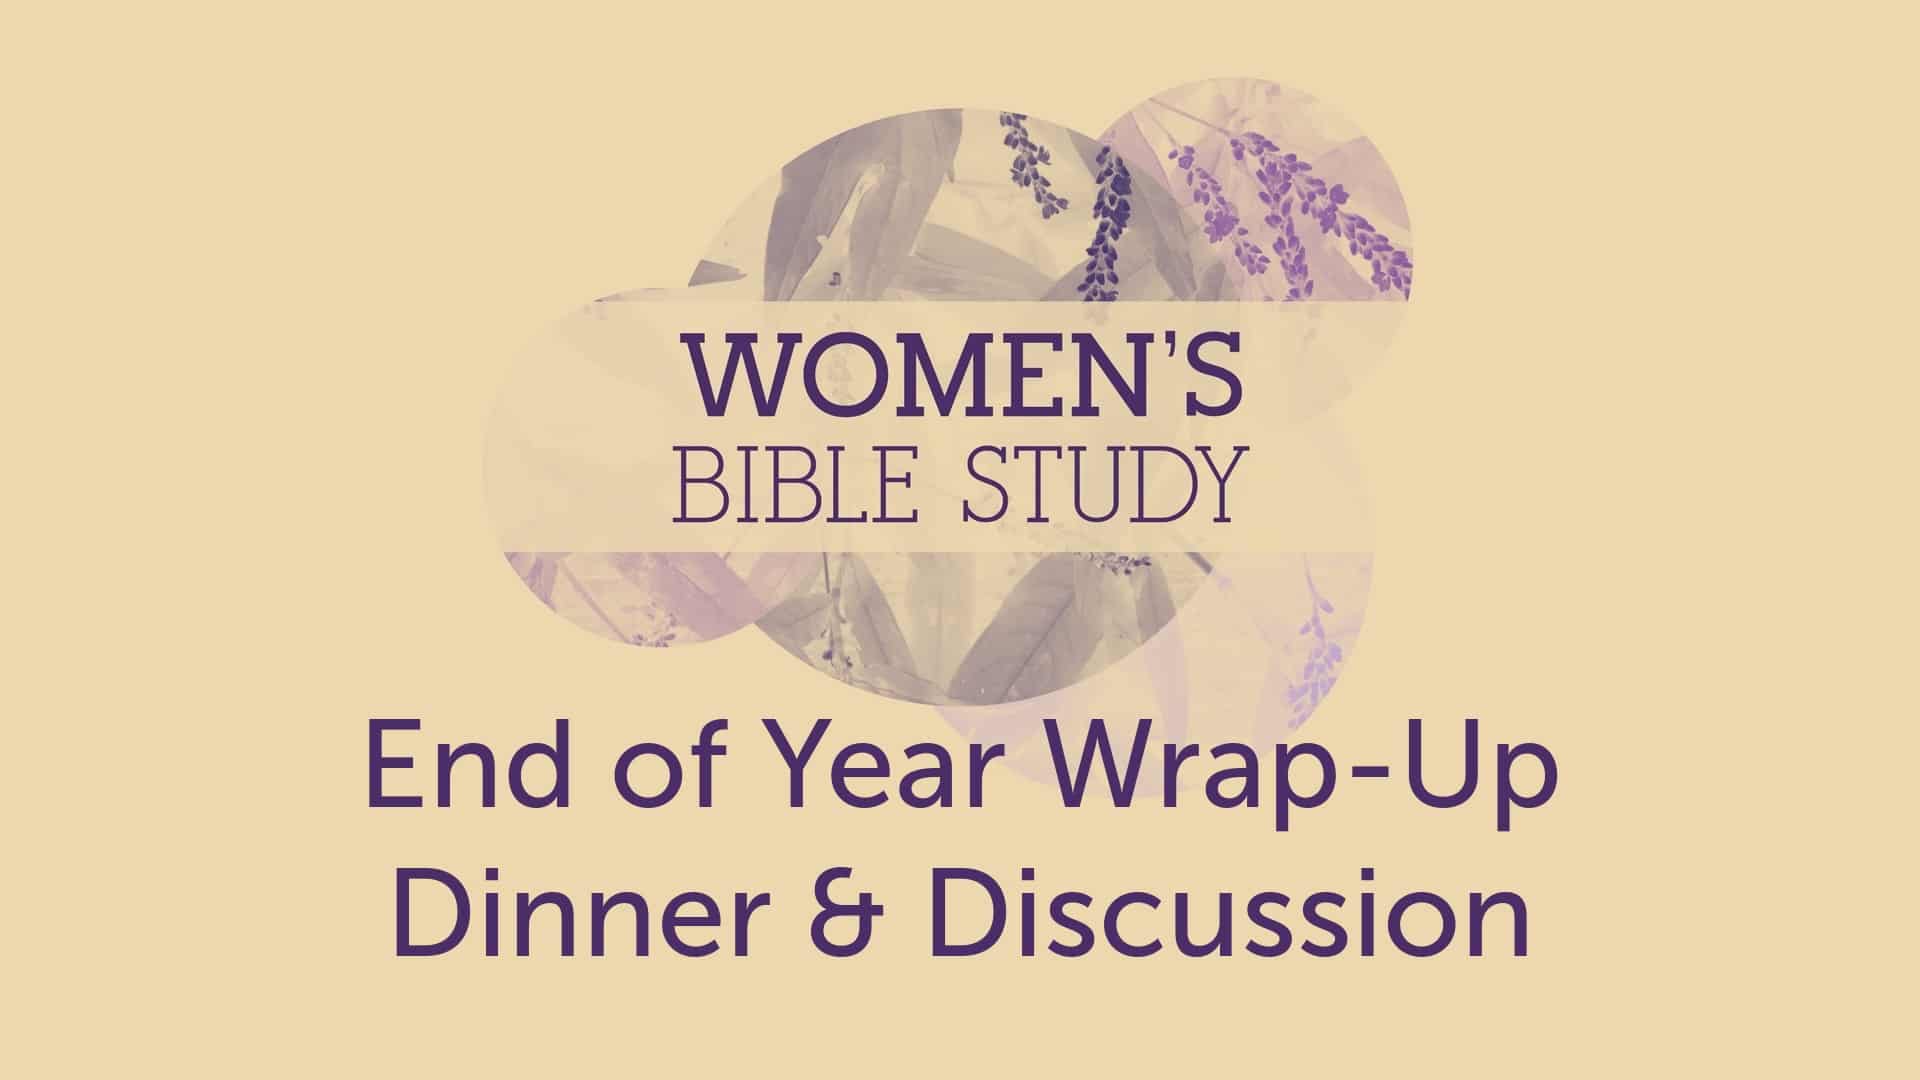 Women's Bible Study End of Year Wrap-up Dinner & Discussion